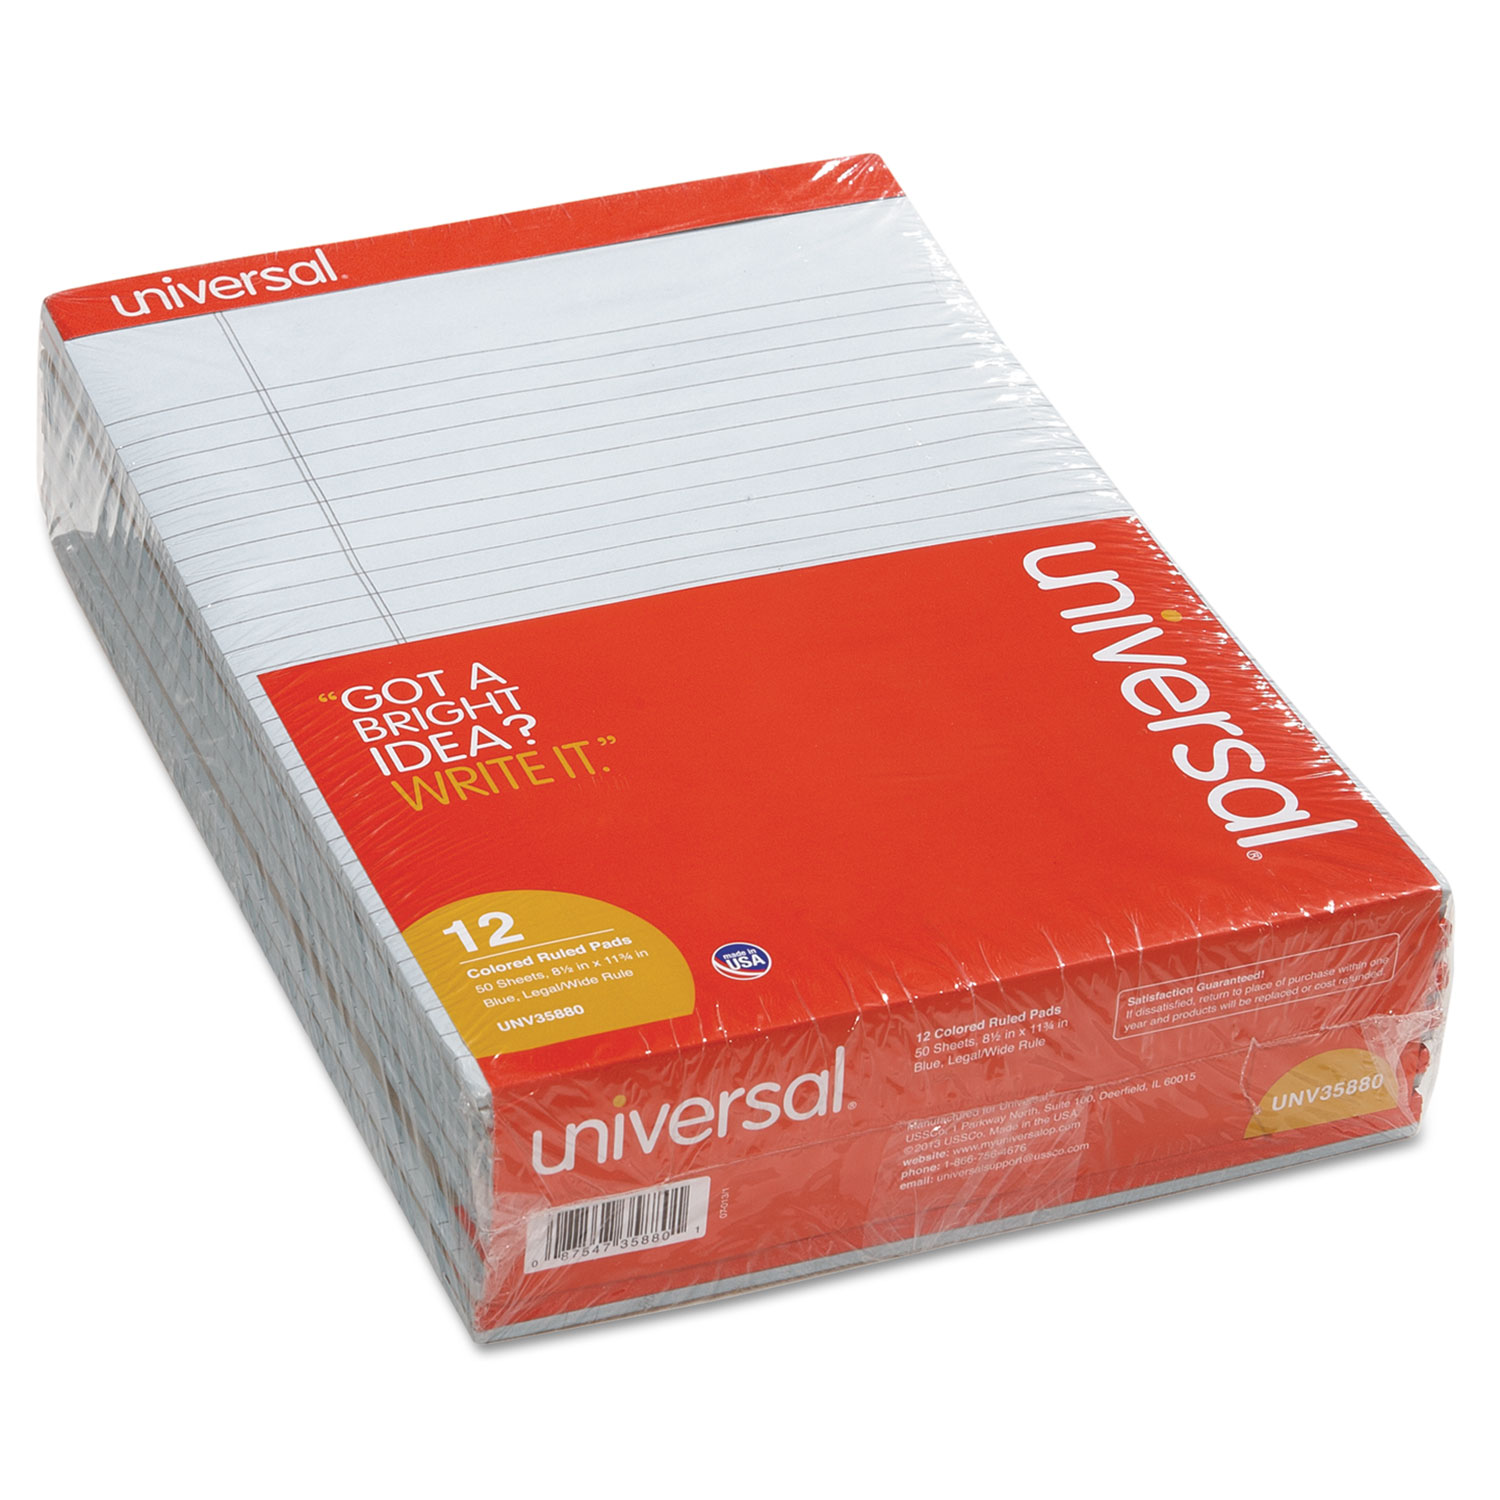  Universal UNV35880 Colored Perforated Writing Pads, Wide/Legal Rule, 8.5 x 11, Blue, 50 Sheets, Dozen (UNV35880) 